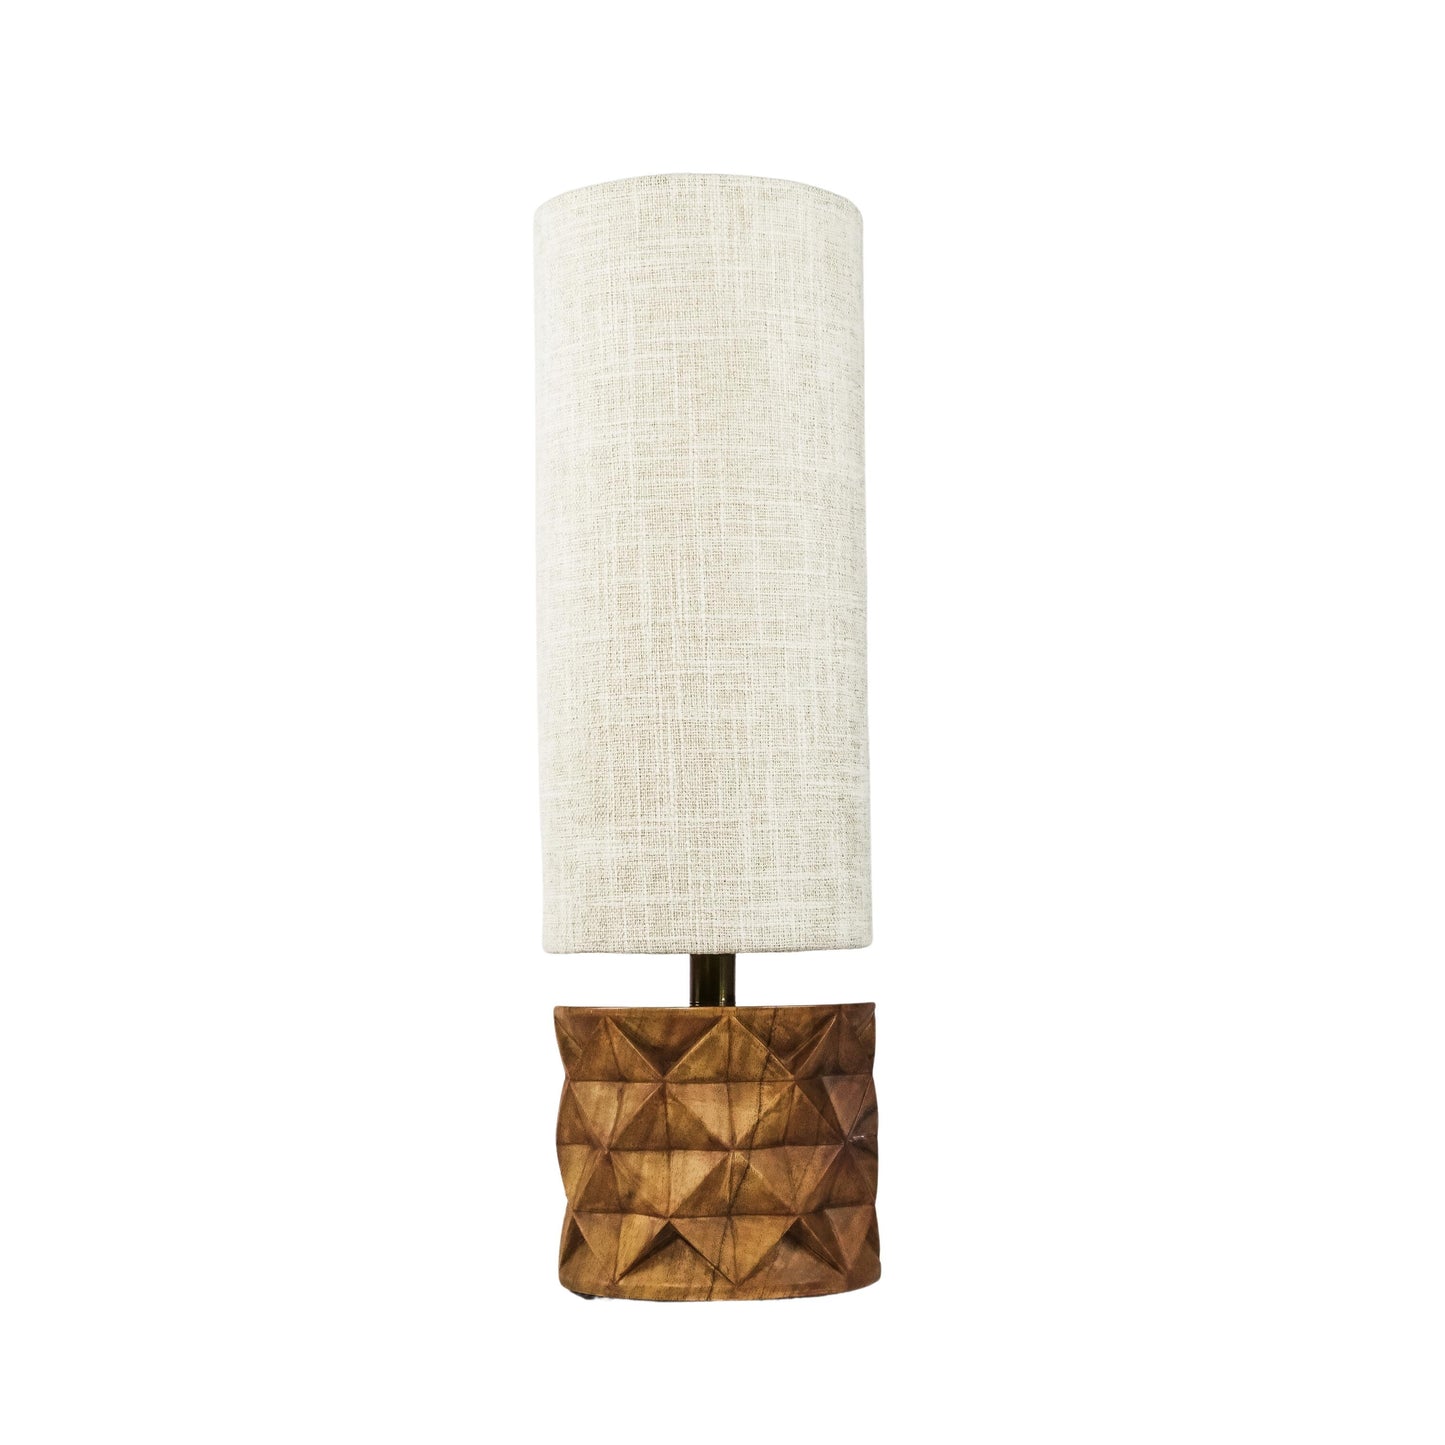 Grid Wooden Table Lamp with Fabric Shade